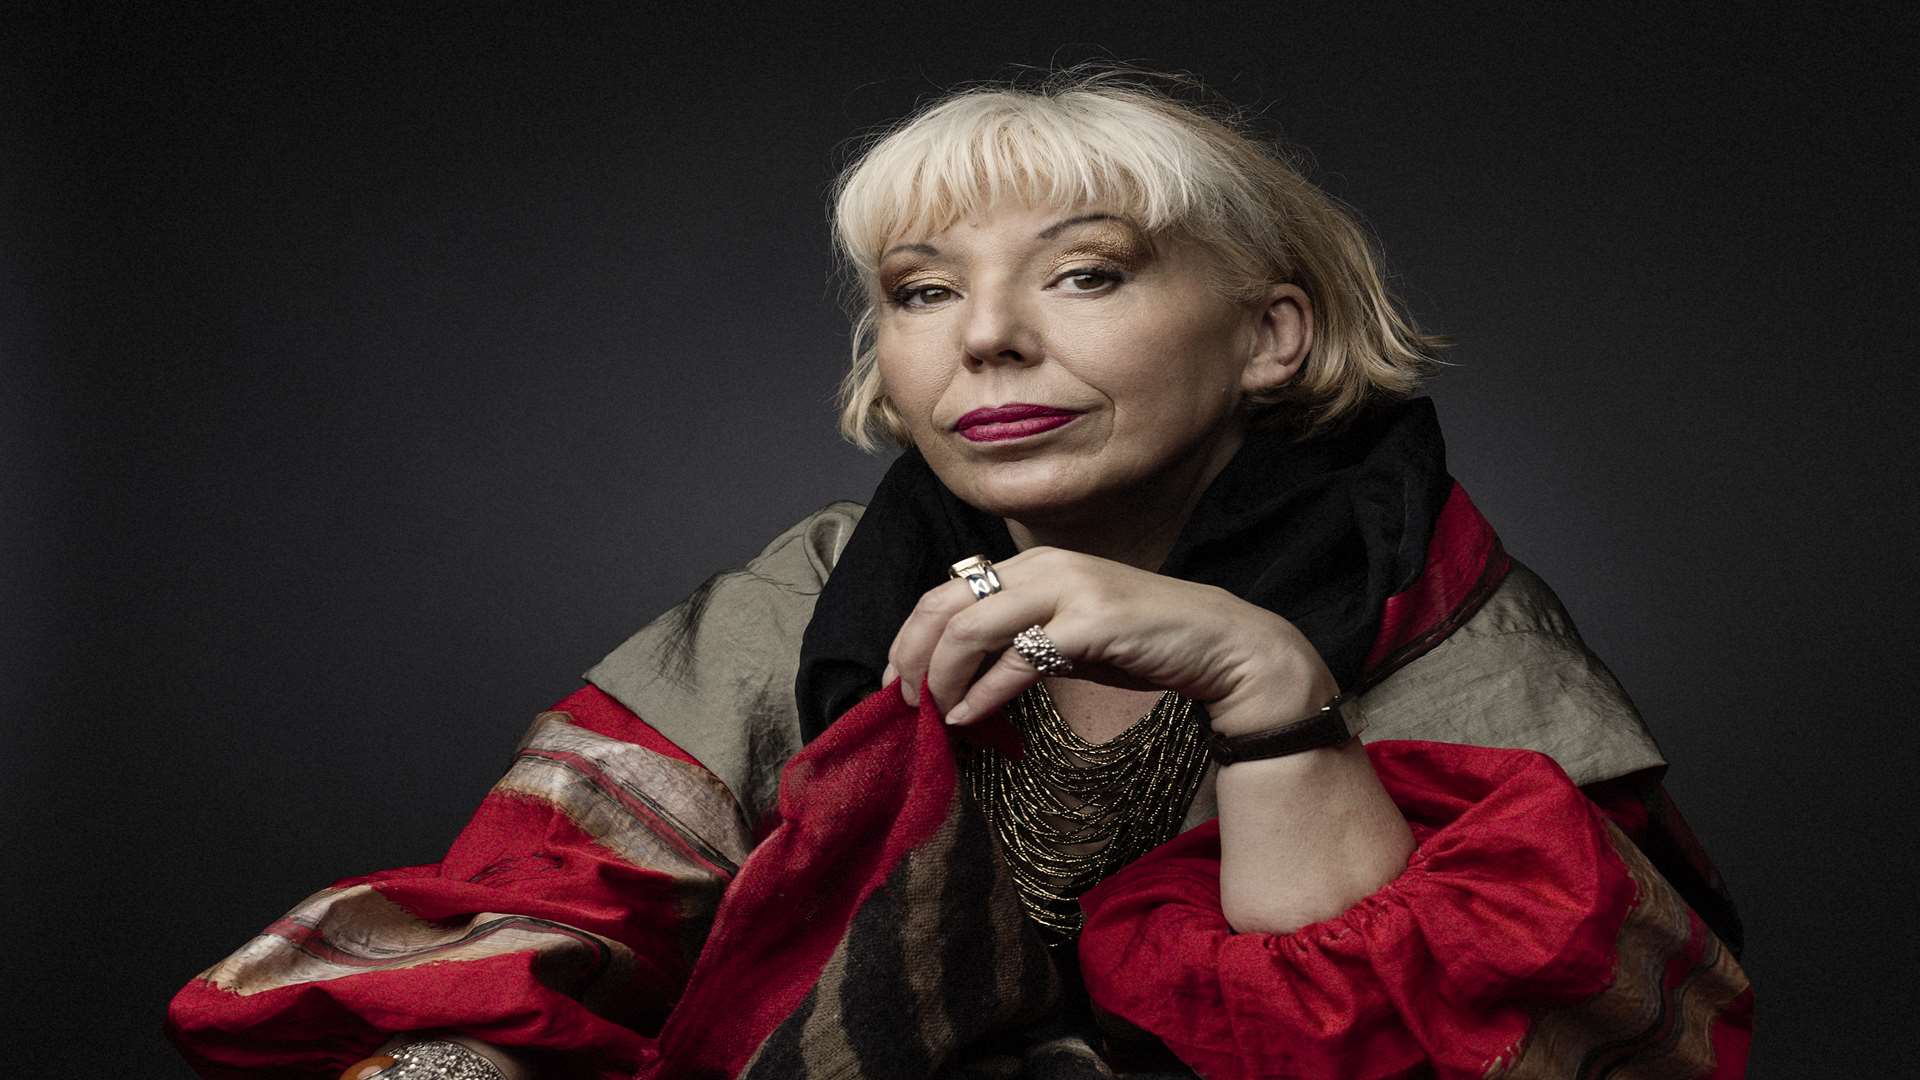 Singer Barb Jungr will be part of POW! Thanet